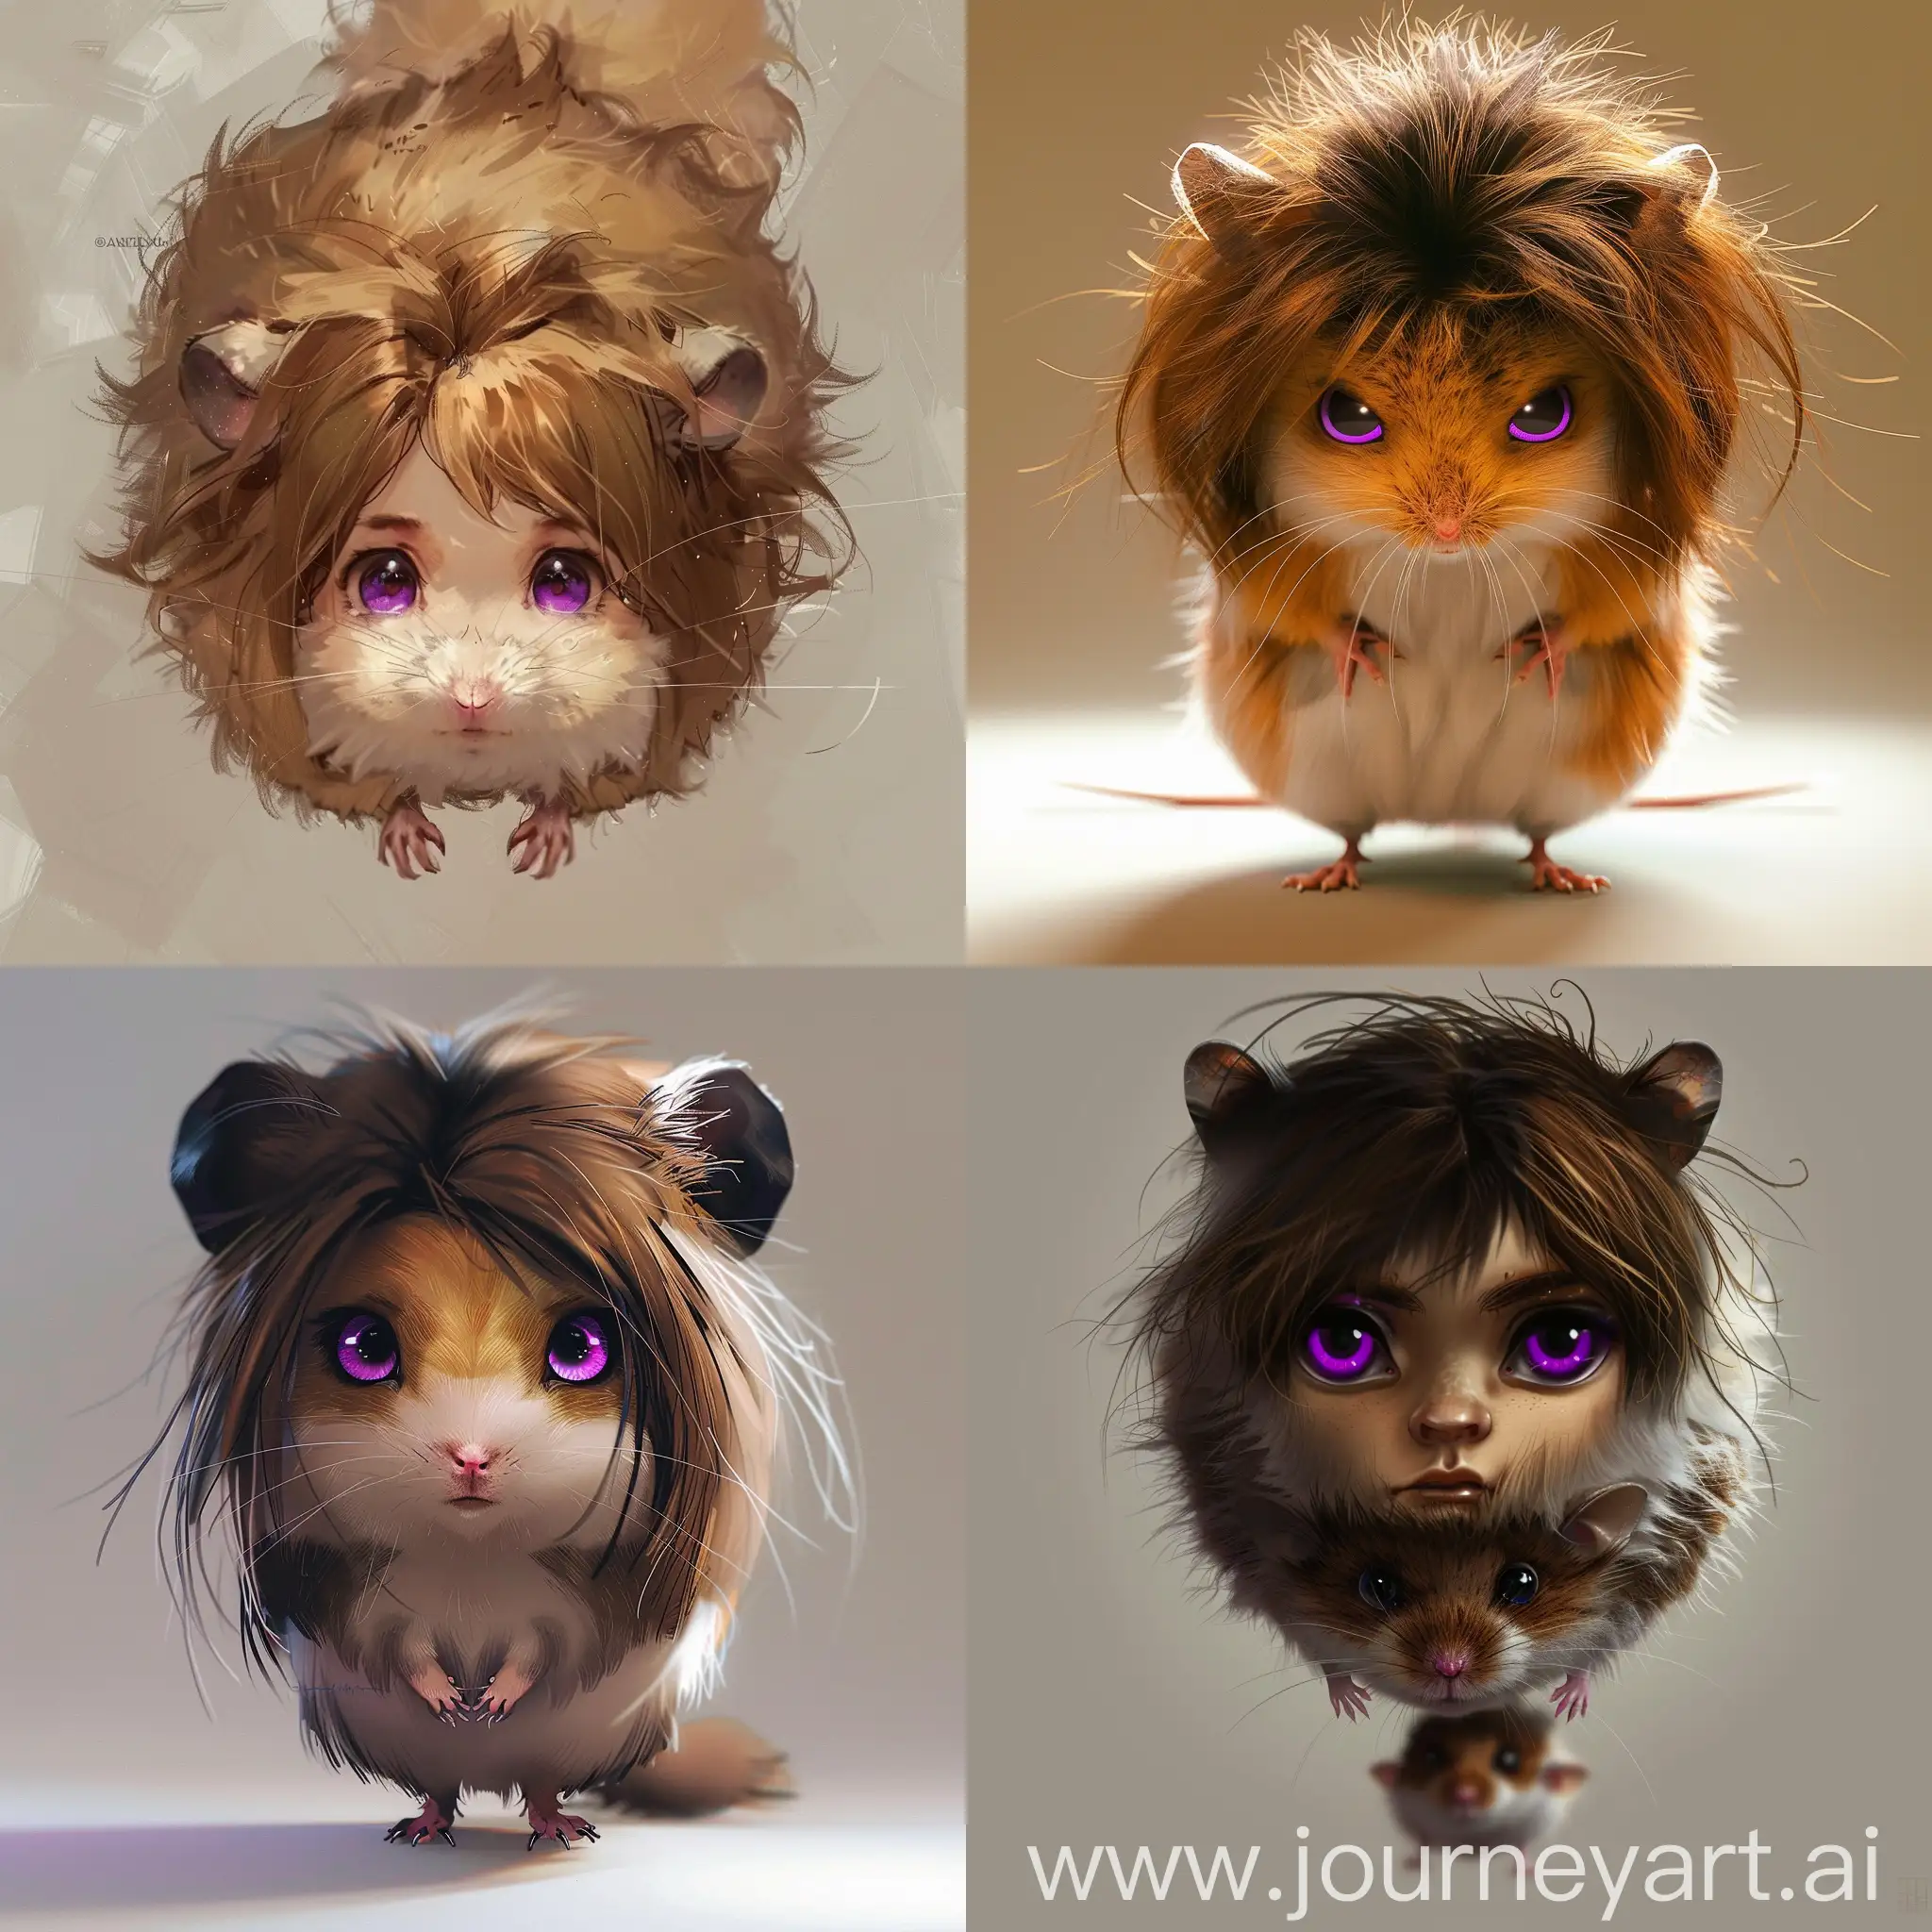 Fantastical-HamsterGirl-Hybrid-with-Fluffy-Tail-and-Piercing-Purple-Eyes